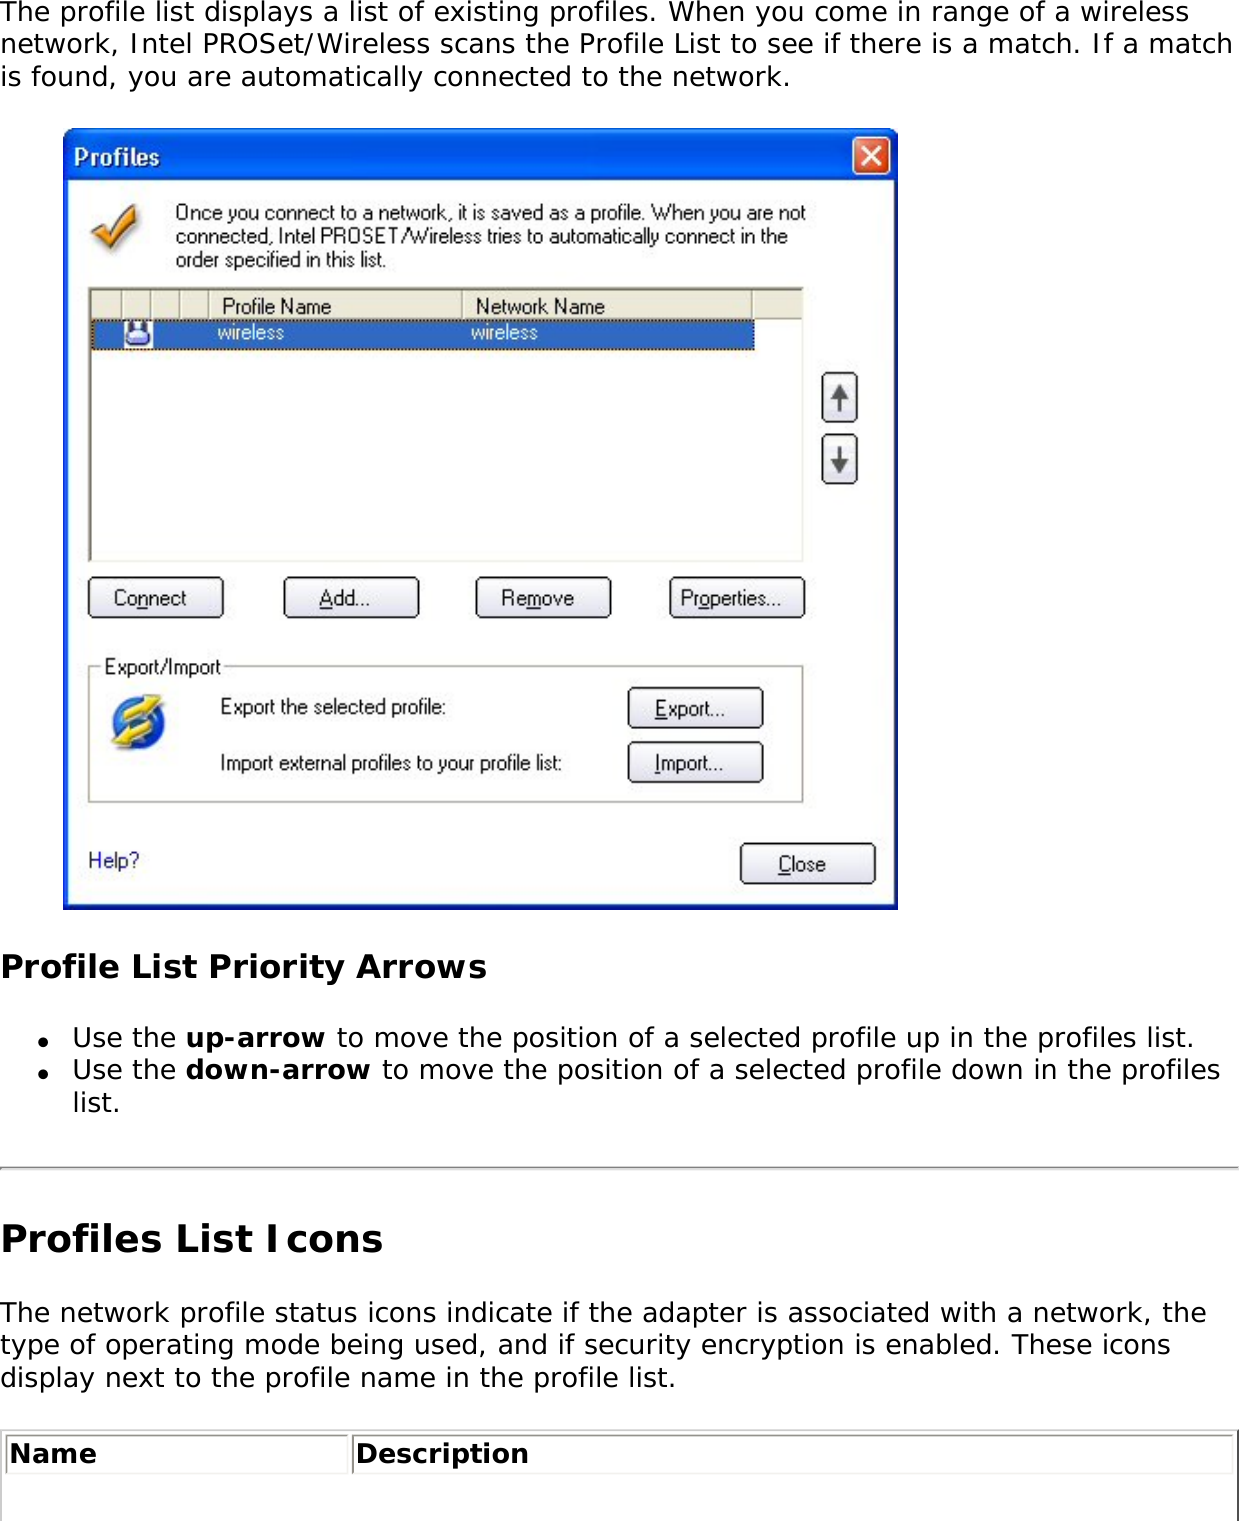 The profile list displays a list of existing profiles. When you come in range of a wireless network, Intel PROSet/Wireless scans the Profile List to see if there is a match. If a match is found, you are automatically connected to the network.    Profile List Priority Arrows●     Use the up-arrow to move the position of a selected profile up in the profiles list.●     Use the down-arrow to move the position of a selected profile down in the profiles list.Profiles List Icons The network profile status icons indicate if the adapter is associated with a network, the type of operating mode being used, and if security encryption is enabled. These icons display next to the profile name in the profile list. Name Description